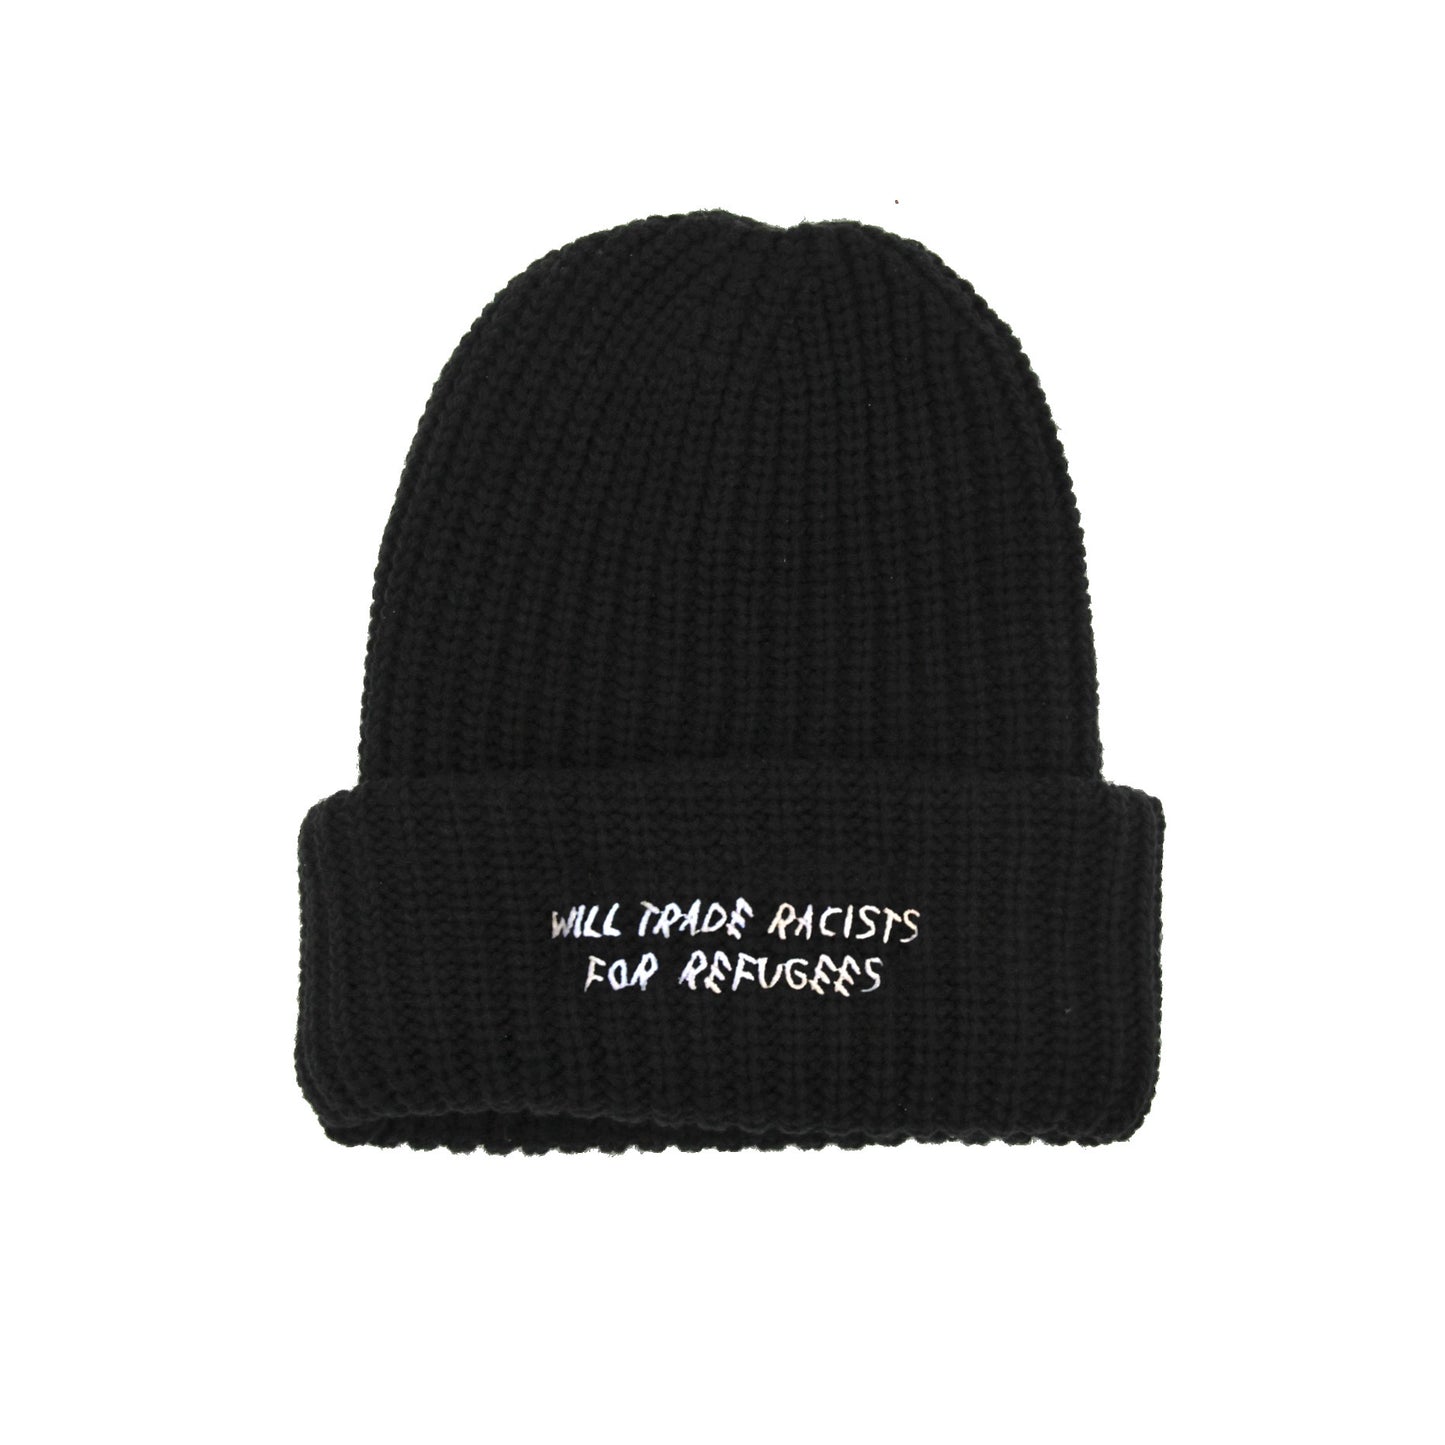 Will Trade Racists Embroidered Beanie